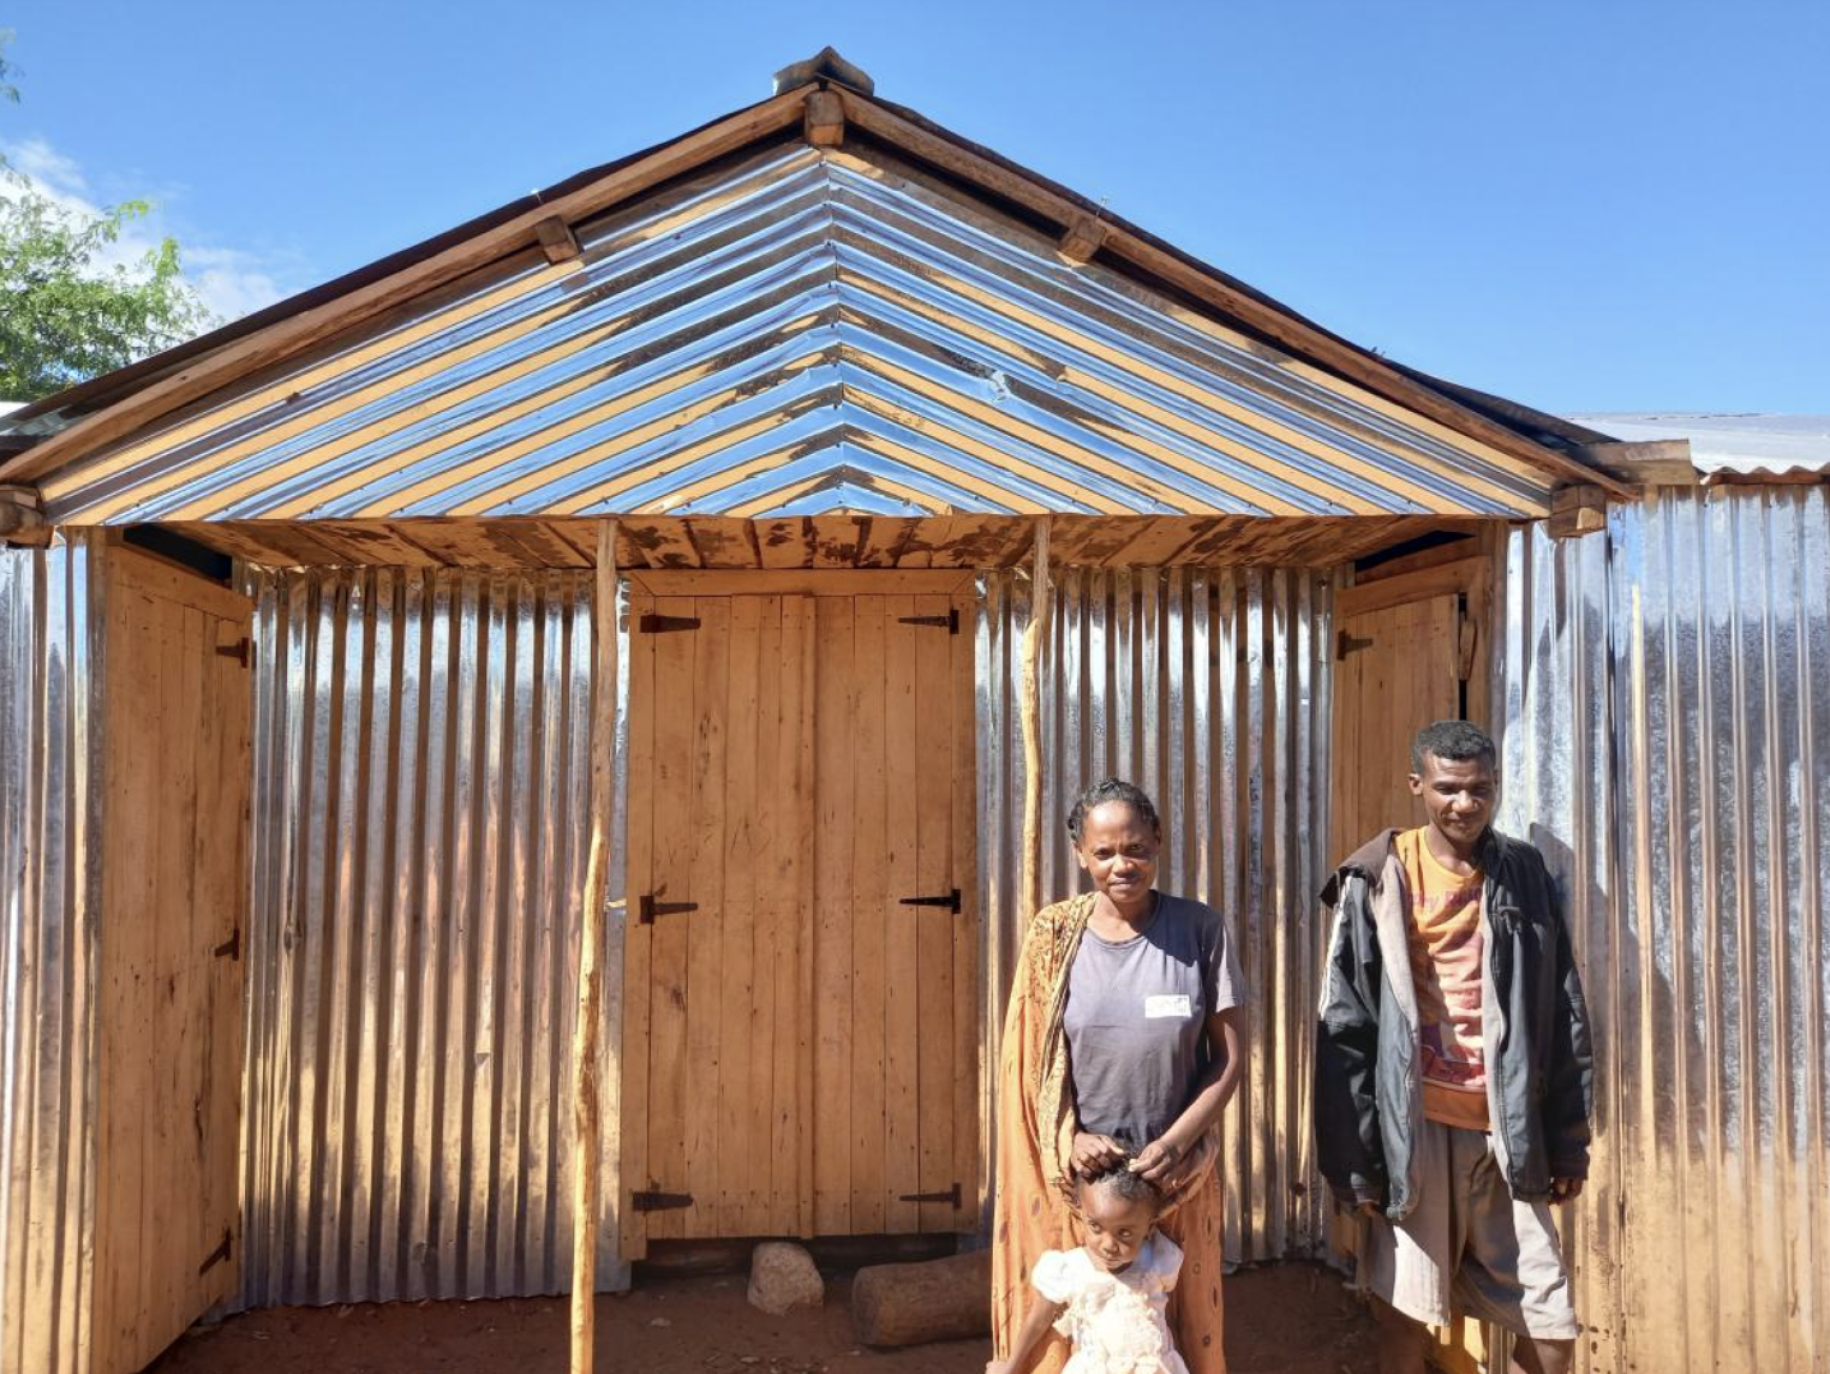 The image shows Fagnosea and Masy with their child standing in front of the house they built.